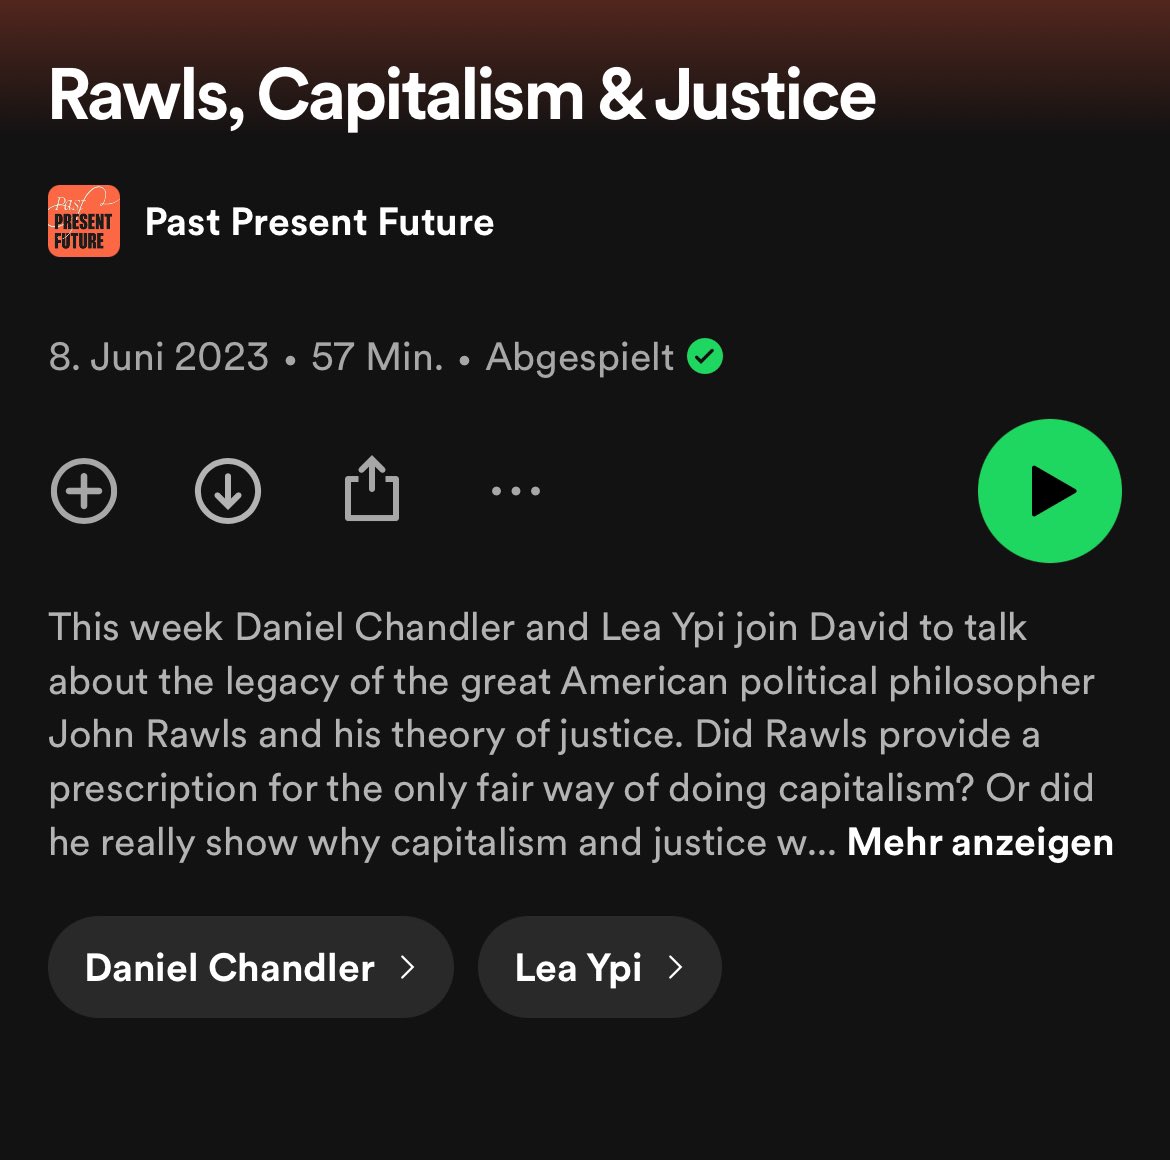 Today I listened to this very inspiring @PPFIdeas podcast on Rawls, democracy, equality and capitalism. I can recommend Runciman's podcast to everyone, not just historians of ideas! (Thank you @kathi_prager for showing me the podcast)